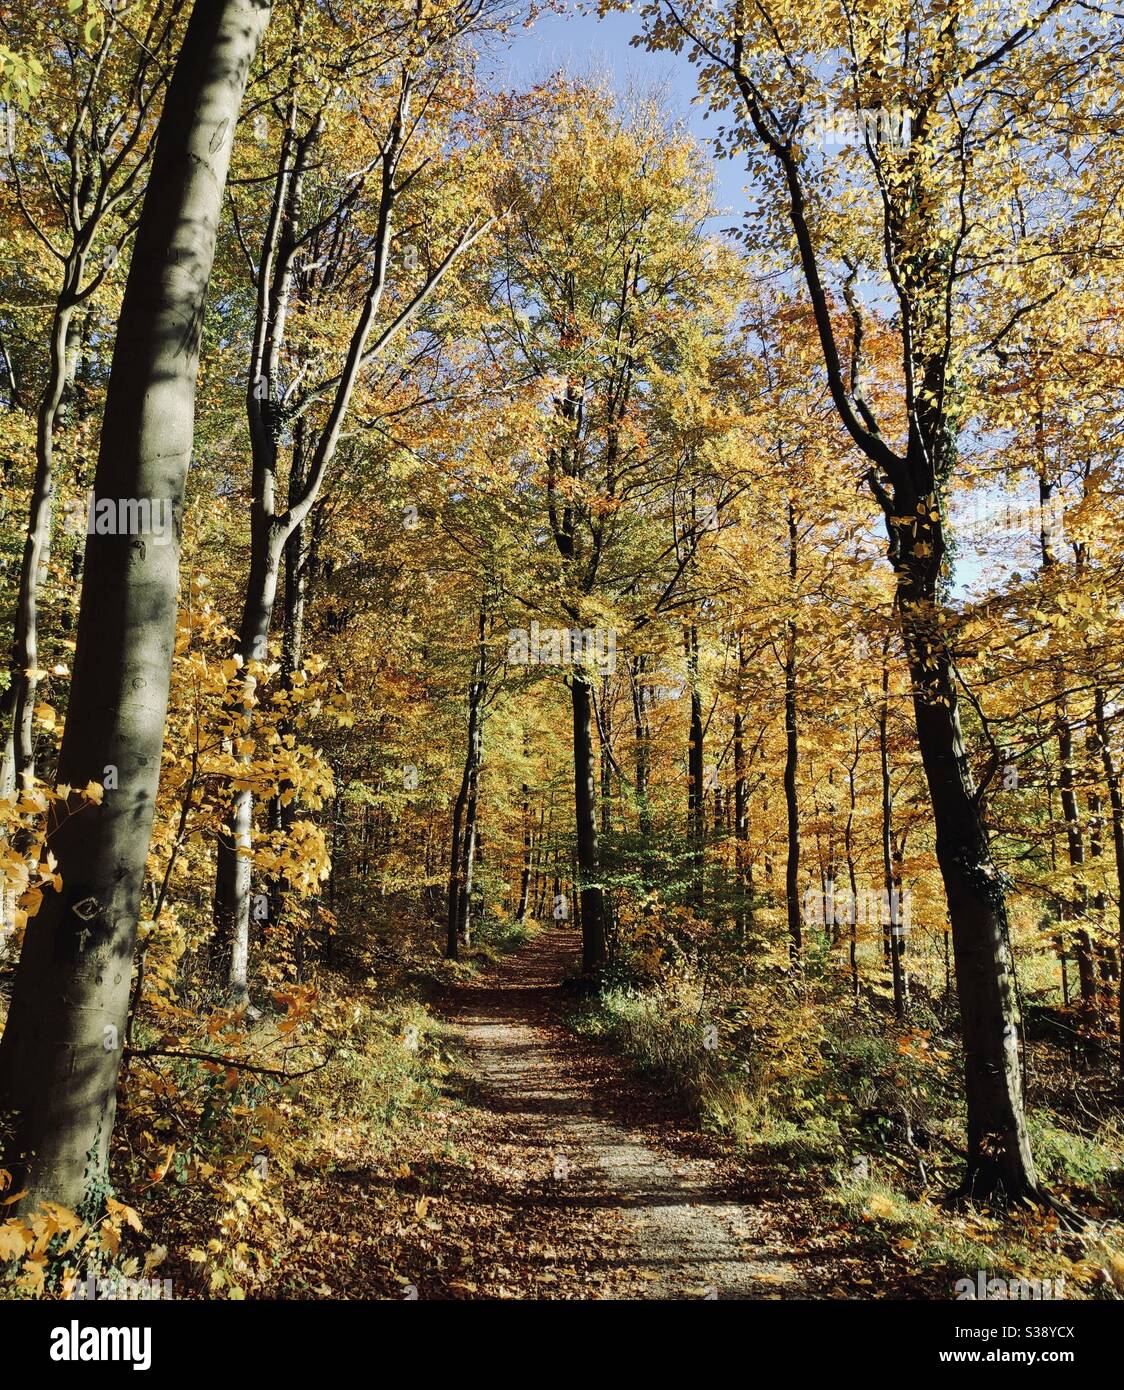 Autumn colors in forest, Bielefeld, Germany Stock Photo